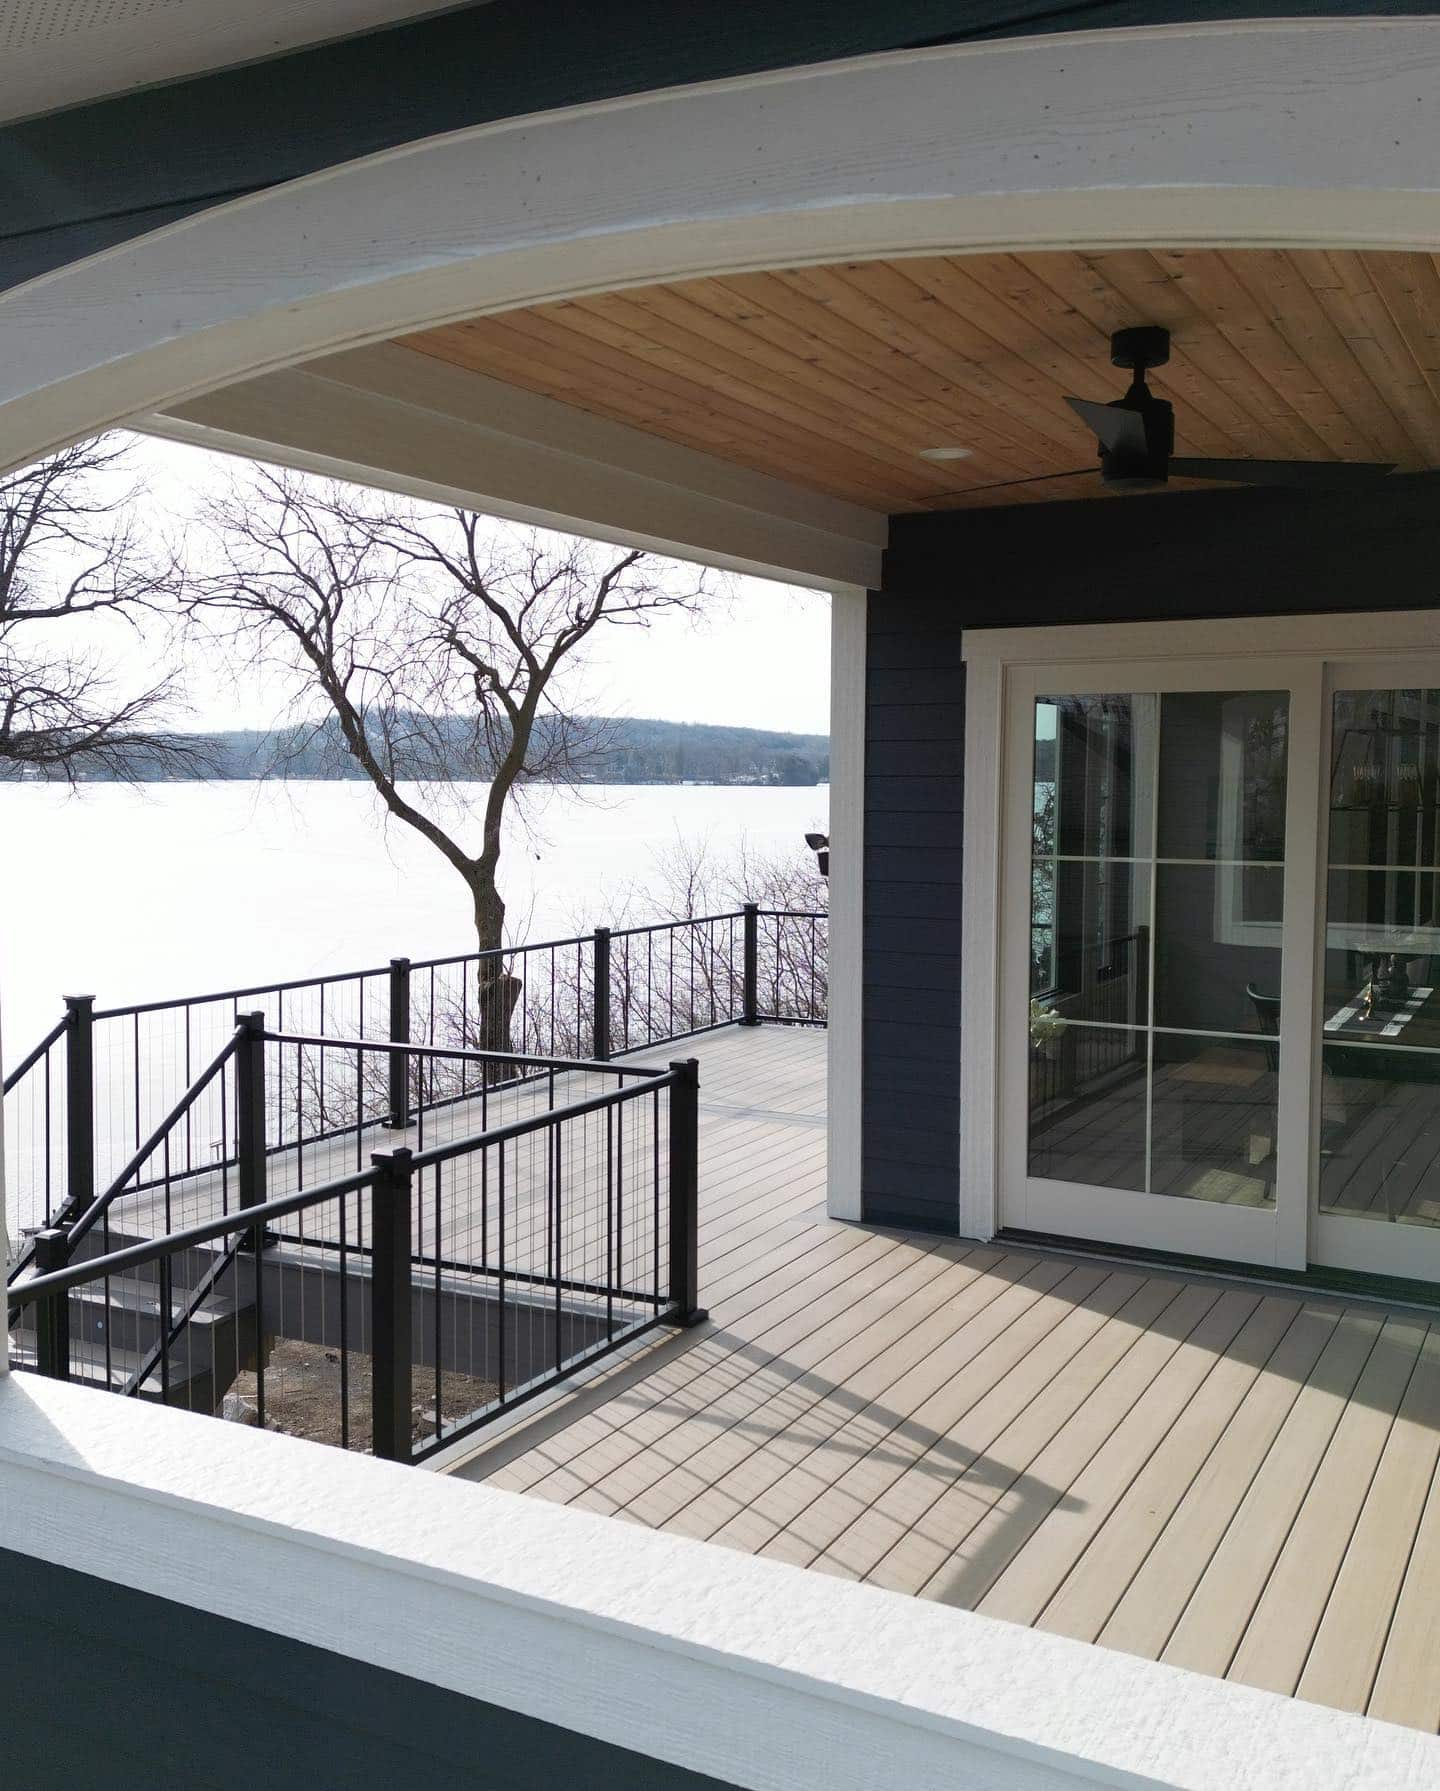 patios - Custom Covered Deck builder and contractor Washington County, WI